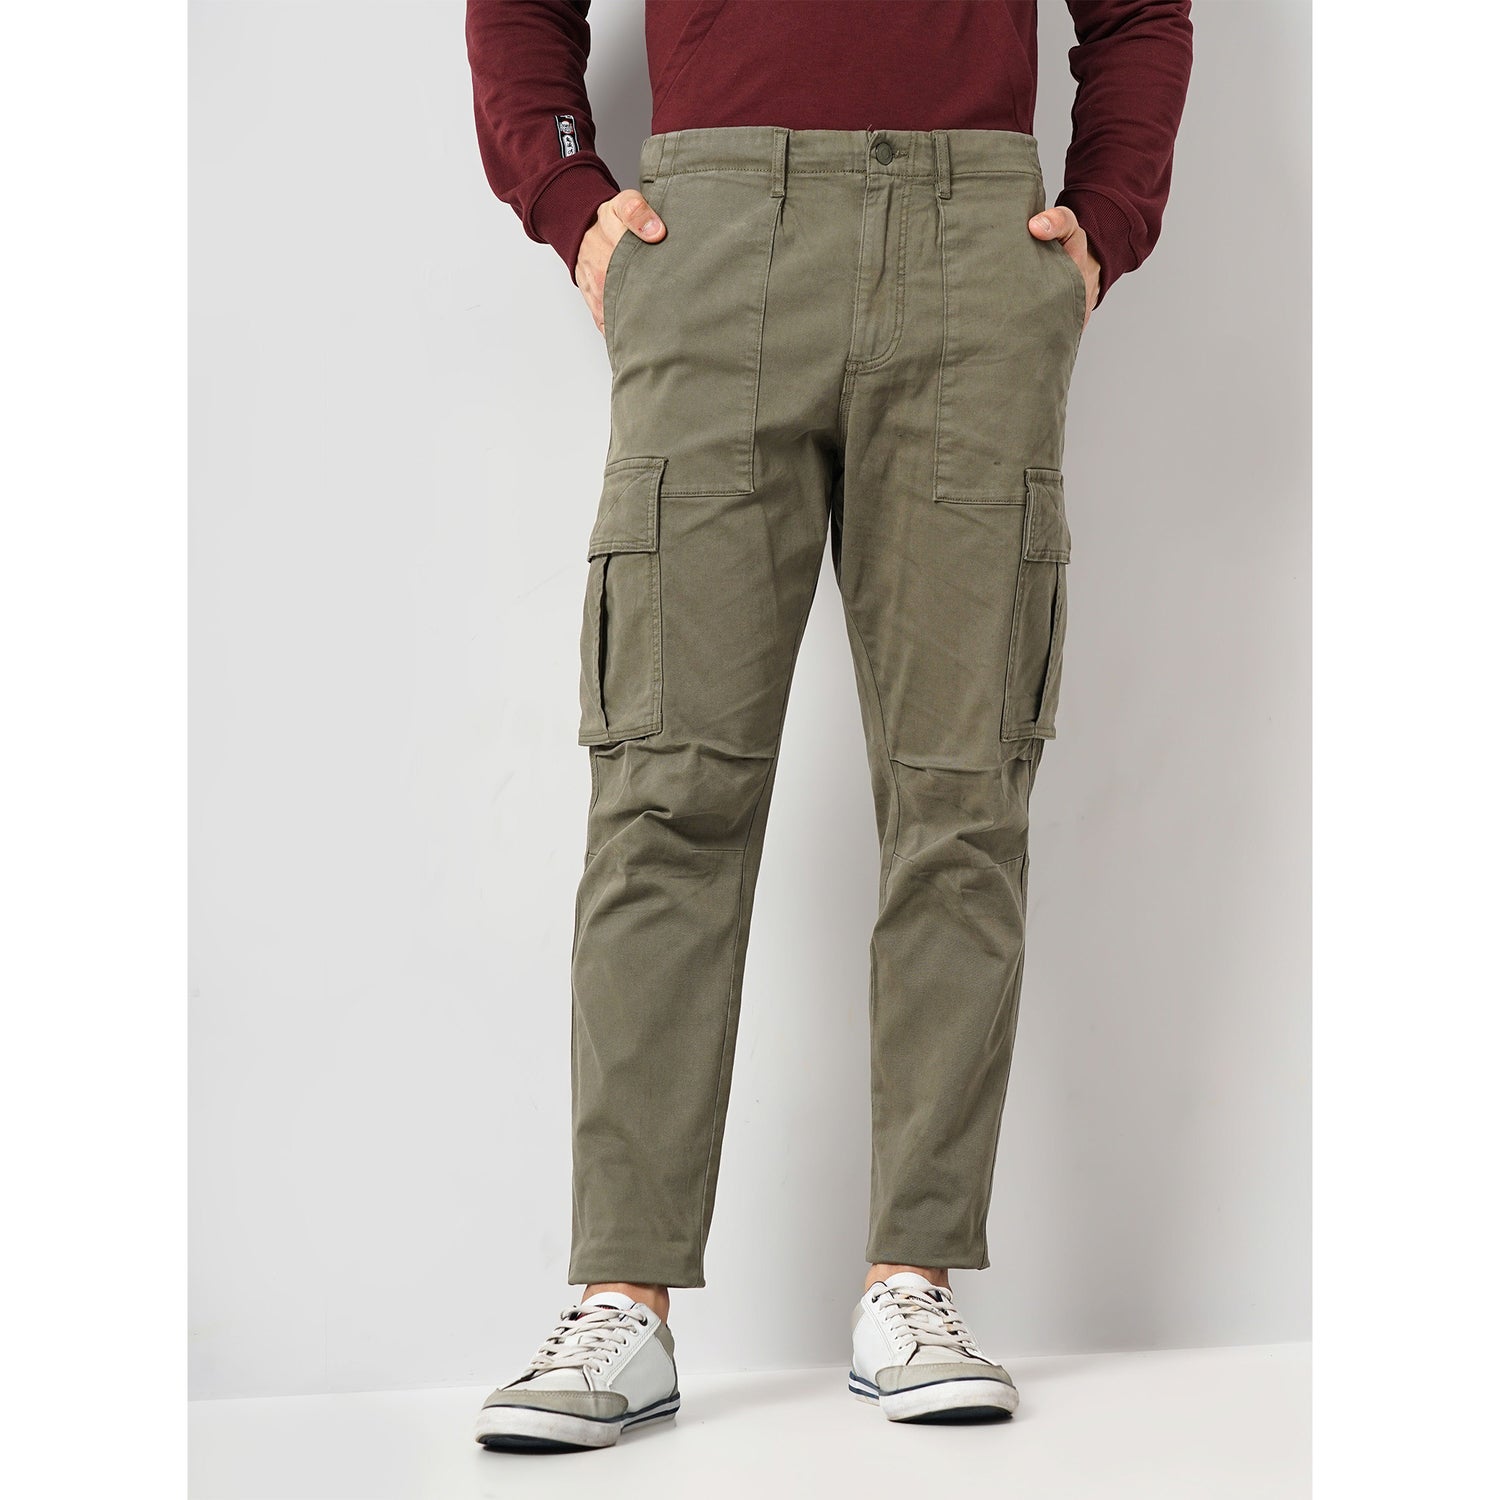 Solid Olive Cotton-Blend Trousers (DOGOIN)